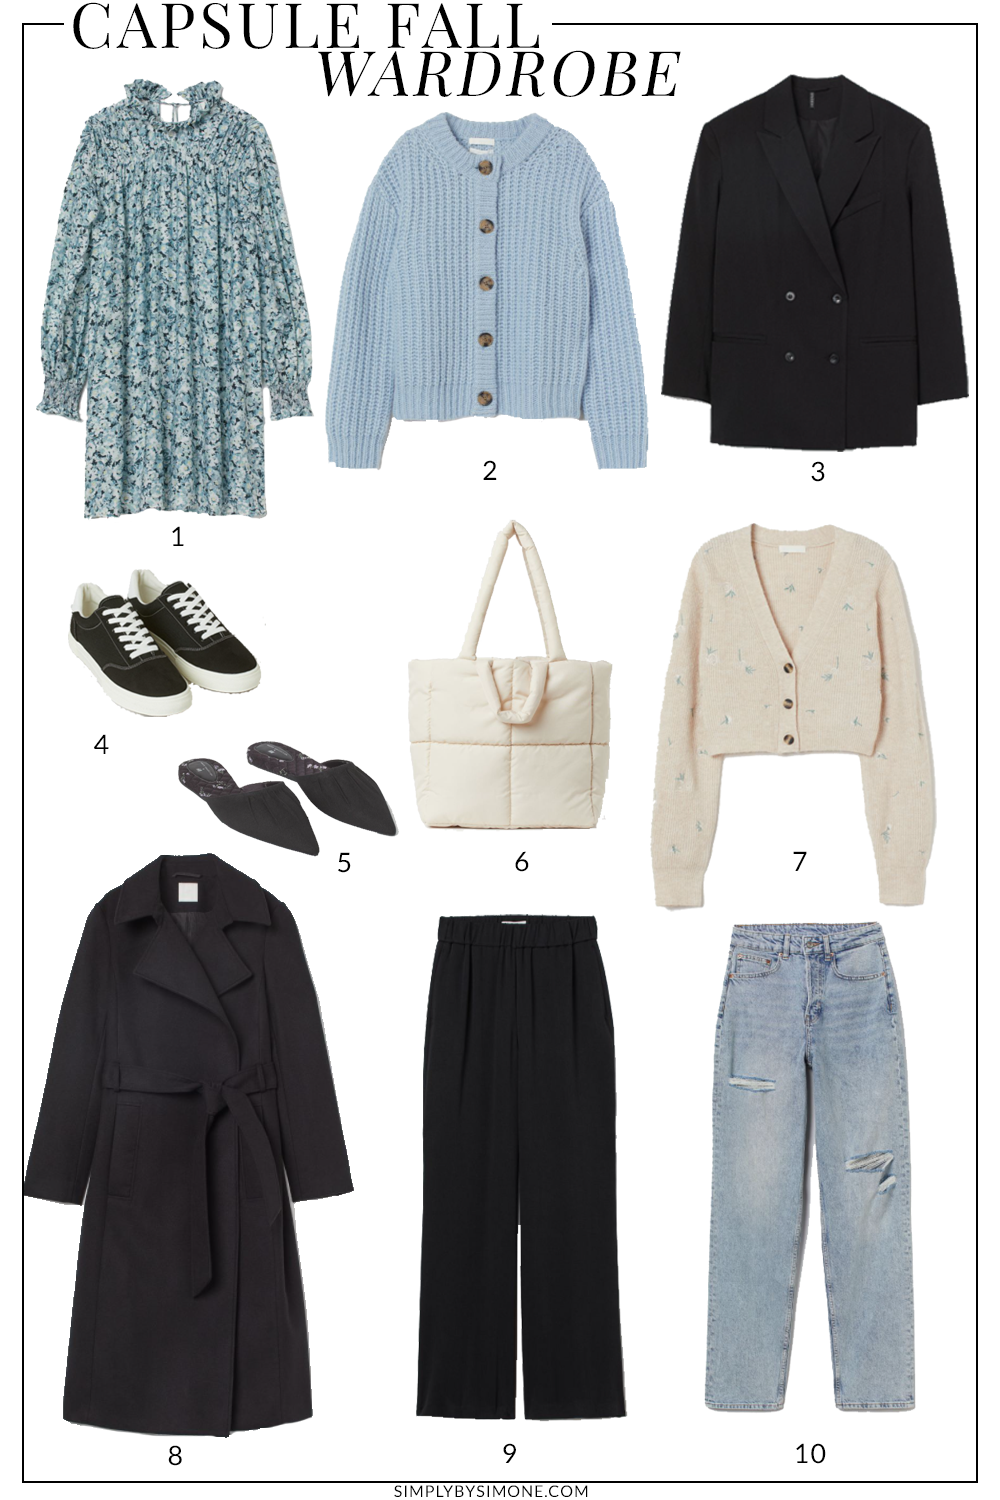 H&m Outfit Ideas 2019 | vlr.eng.br